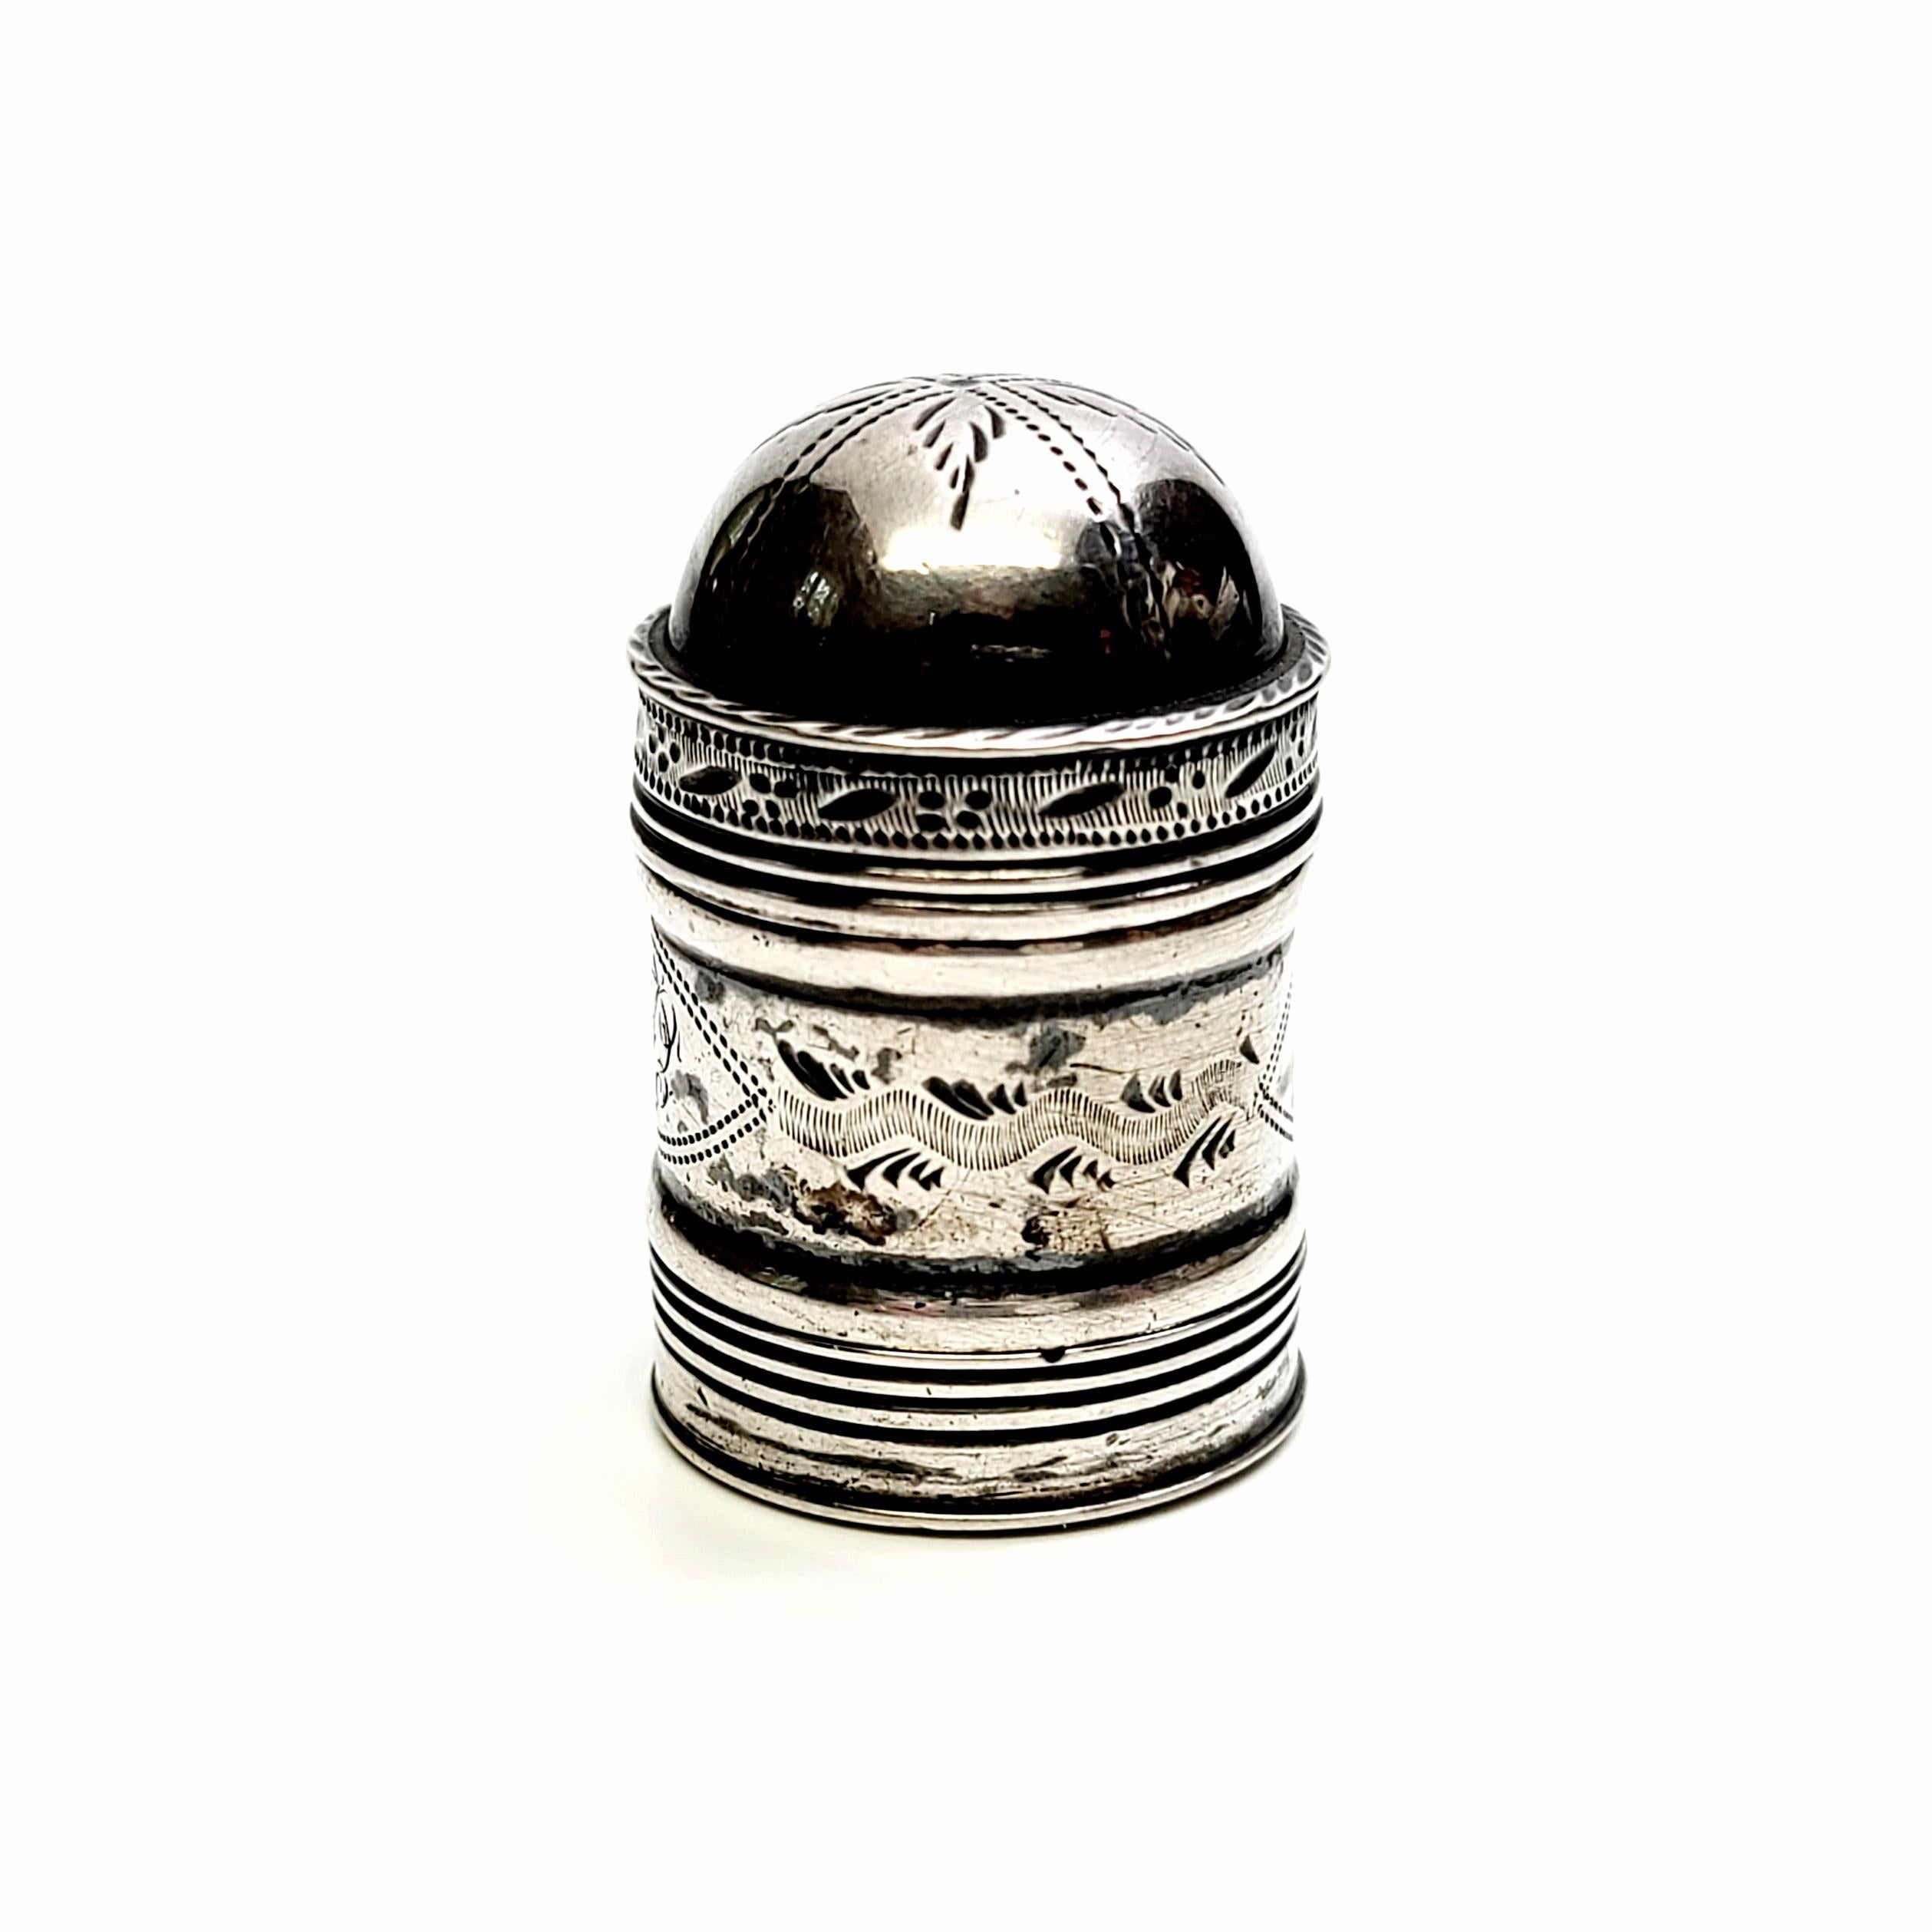 Antique English sterling silver nutmeg grater, circa 1799.

Crafted by English silversmith John Turner, this nutmeg grater comes apart into 3 pieces. The domed lid has an etched leaf design, as well as an etched design around the canister. There